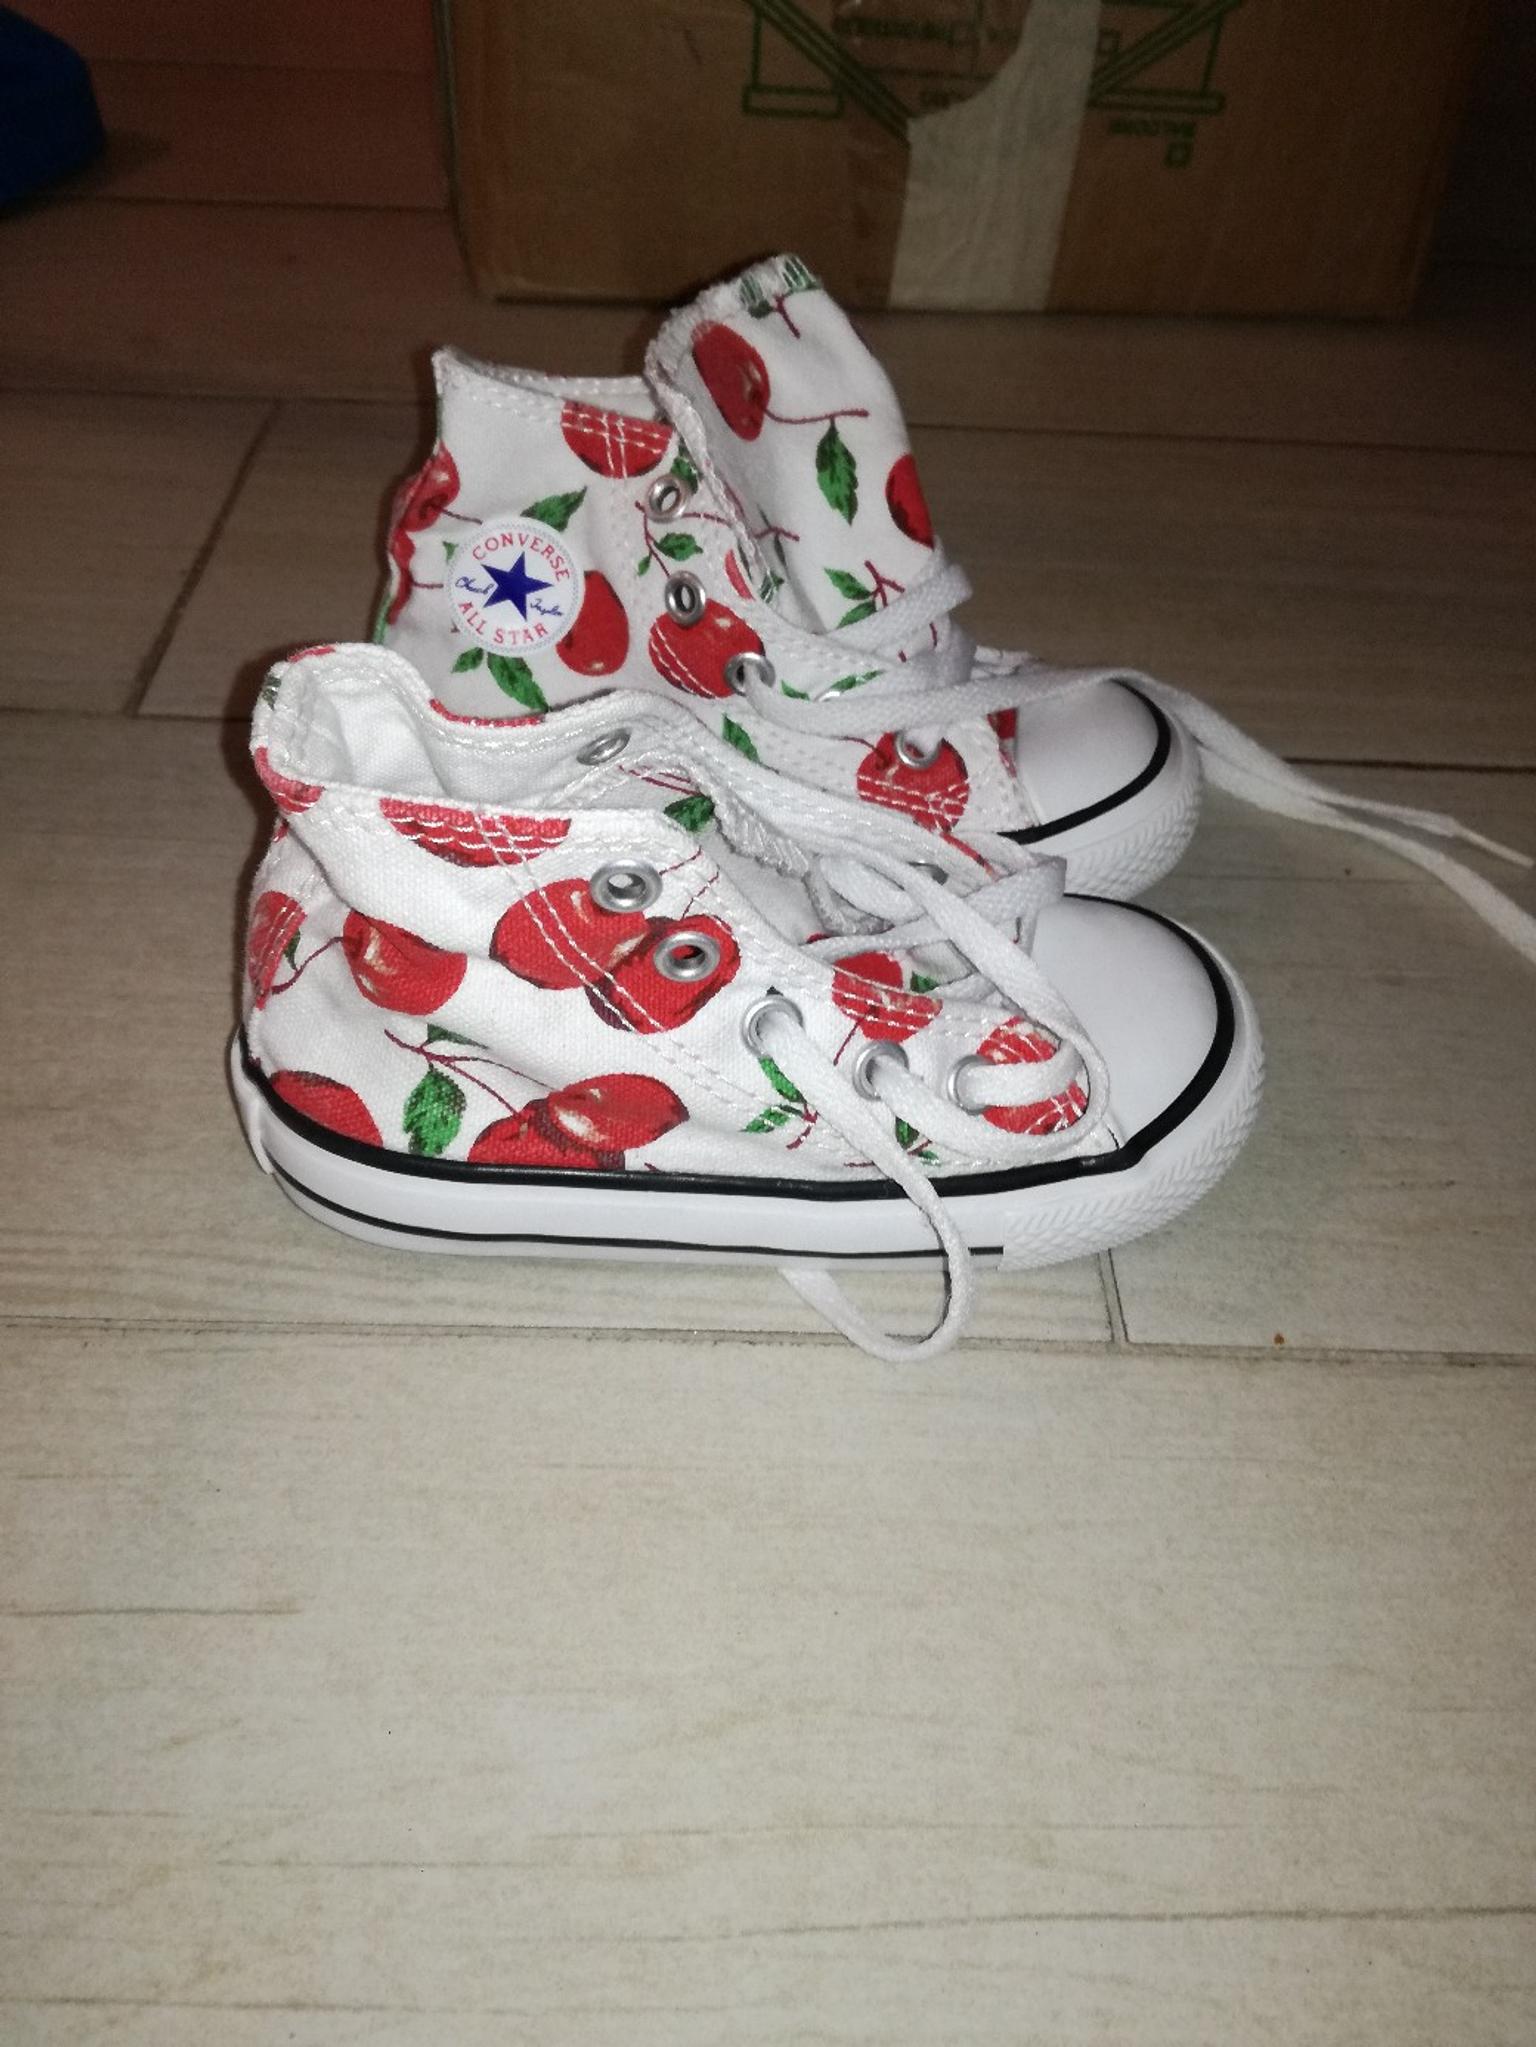 converse All Star bambina n.22 in 20037 Paderno Dugnano for €35.00 for sale  | Shpock